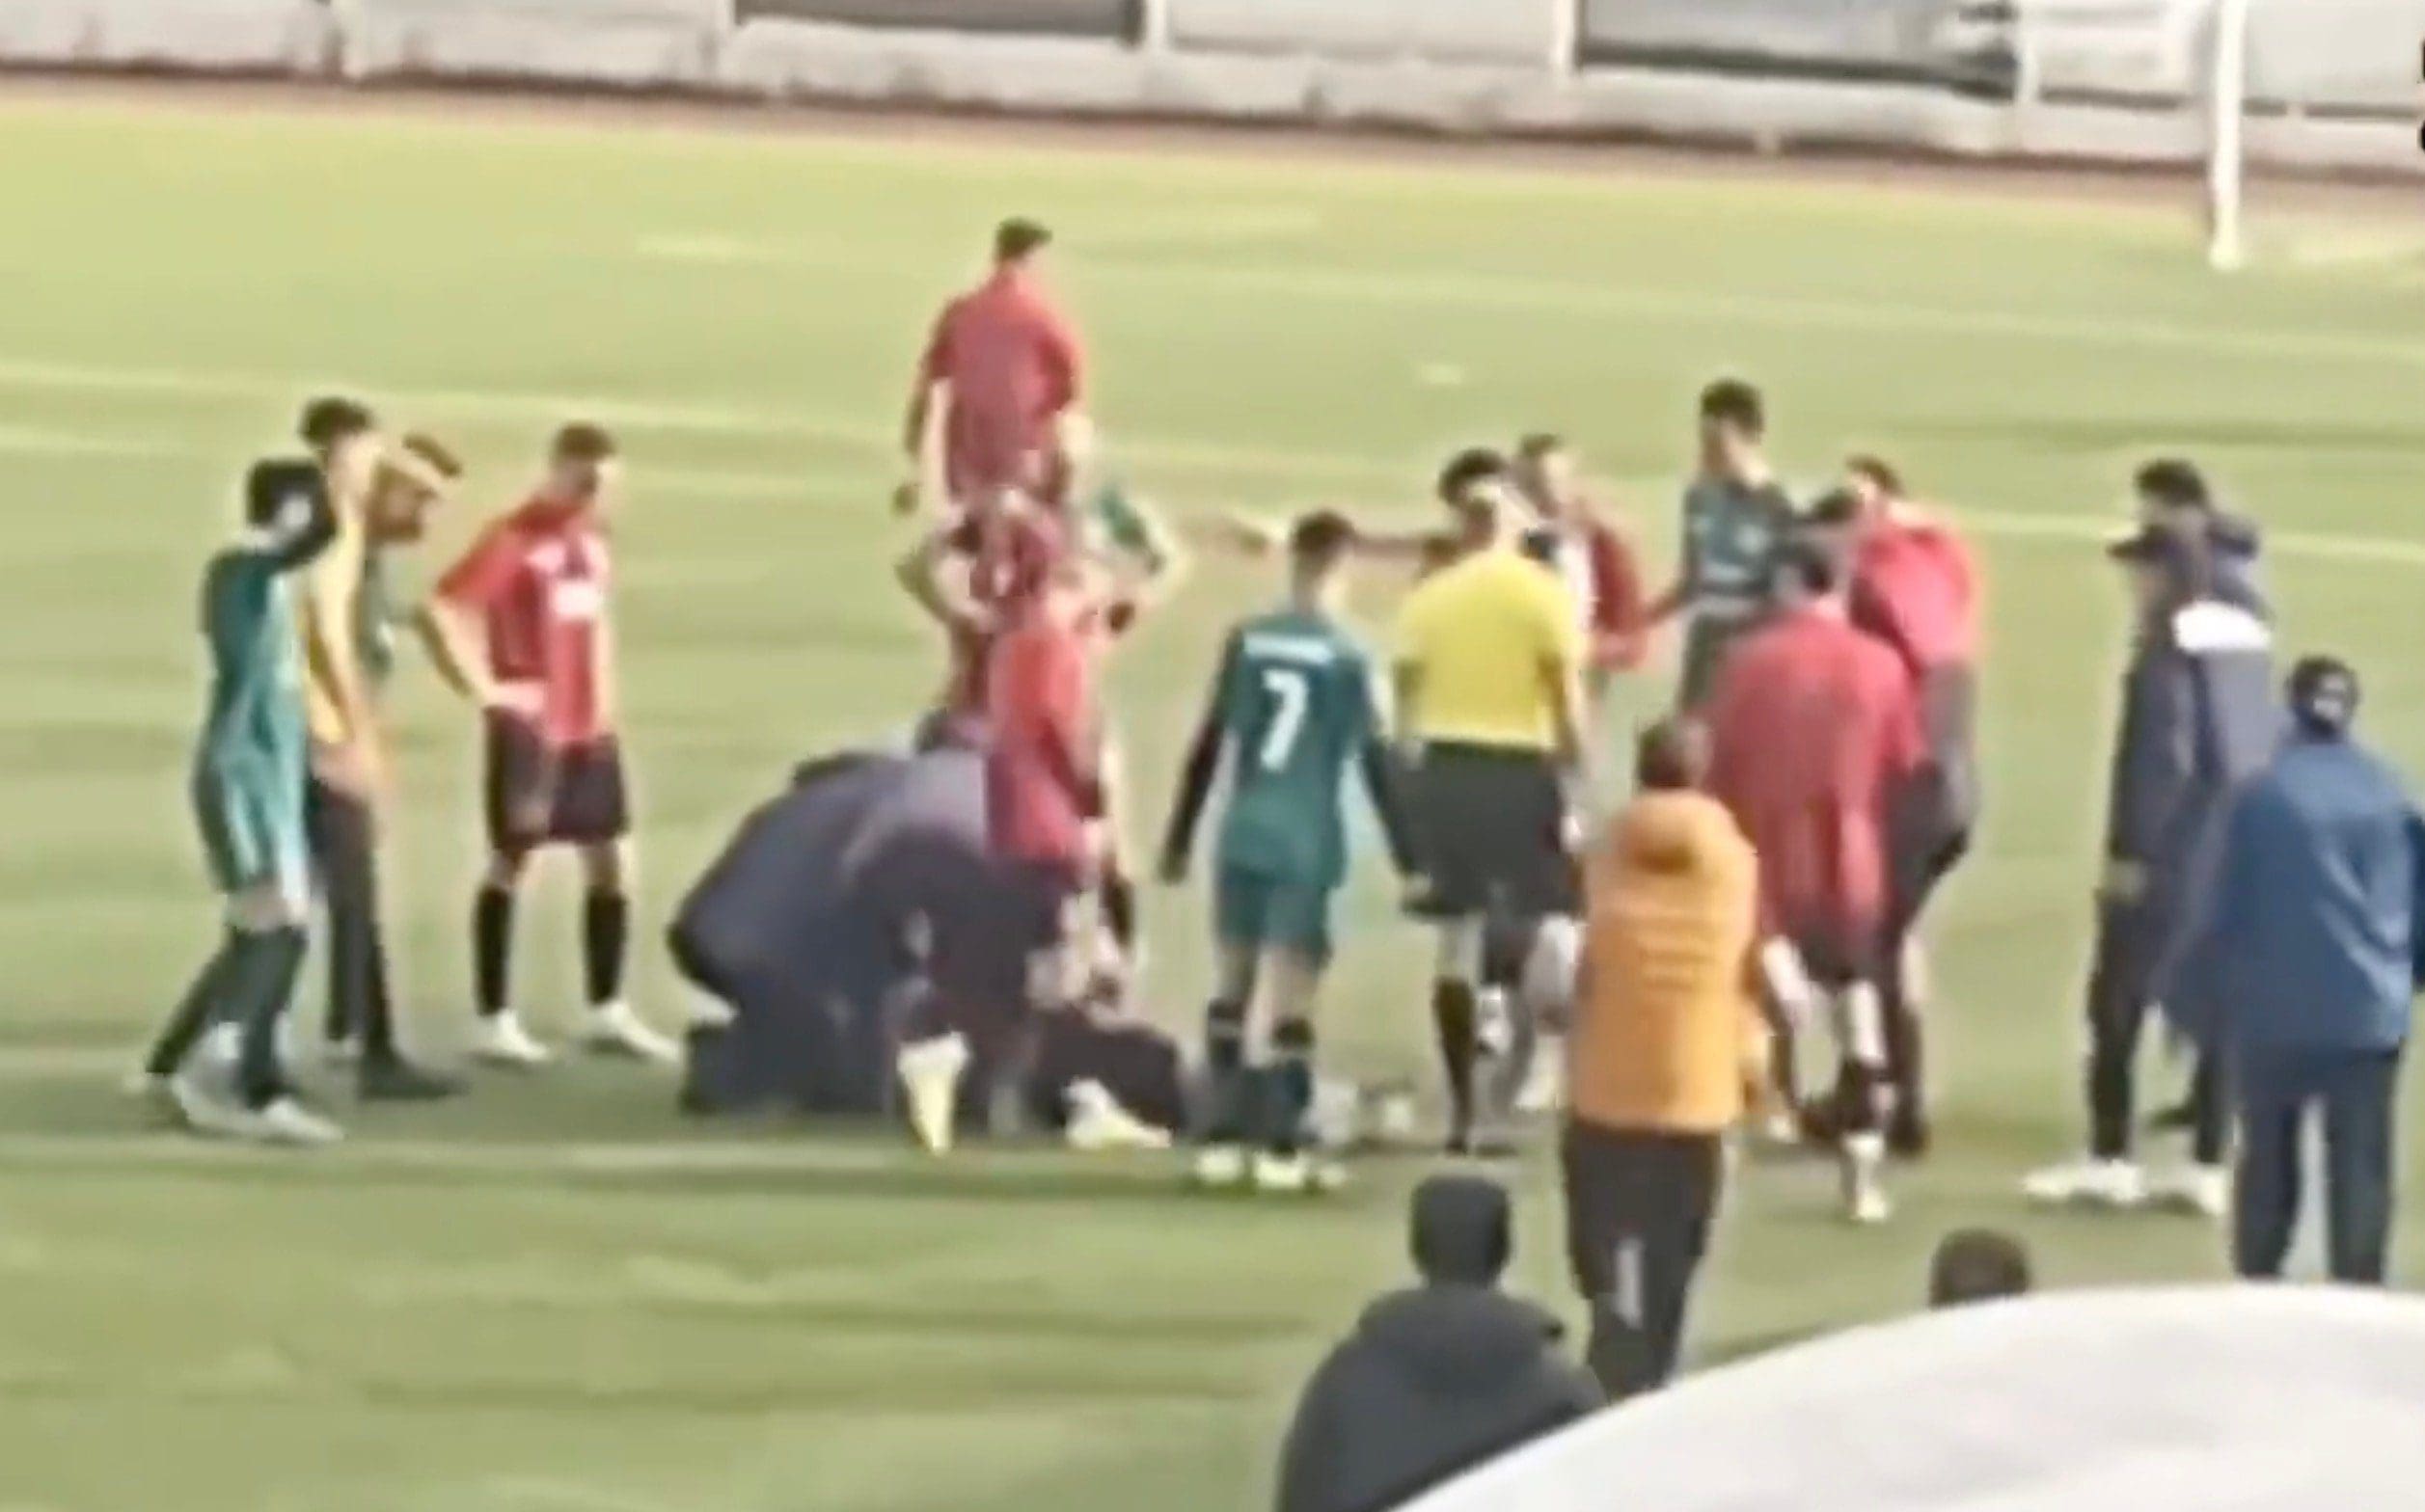 algerian-football-player-drops-dead-during-the-‘african-nations-championship’-match-(video)